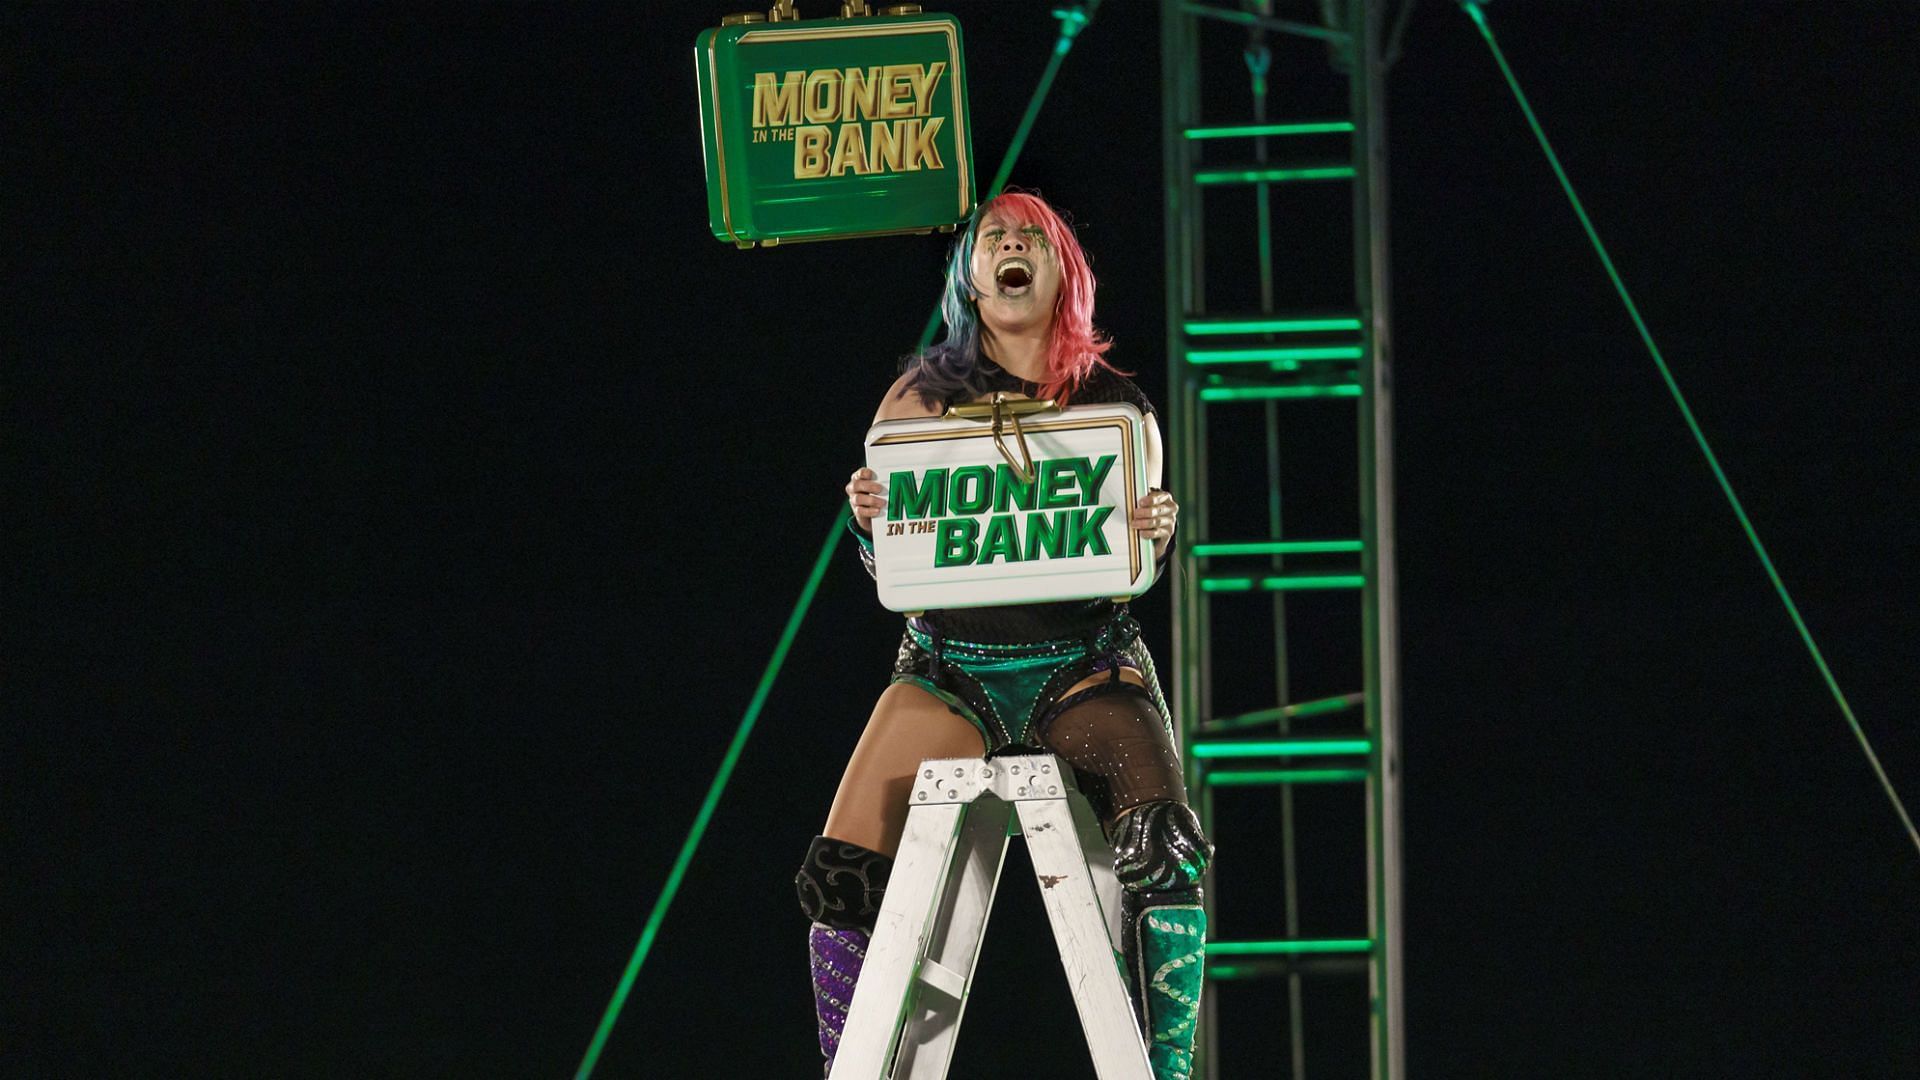 Asuka won the briefcase in 2020.